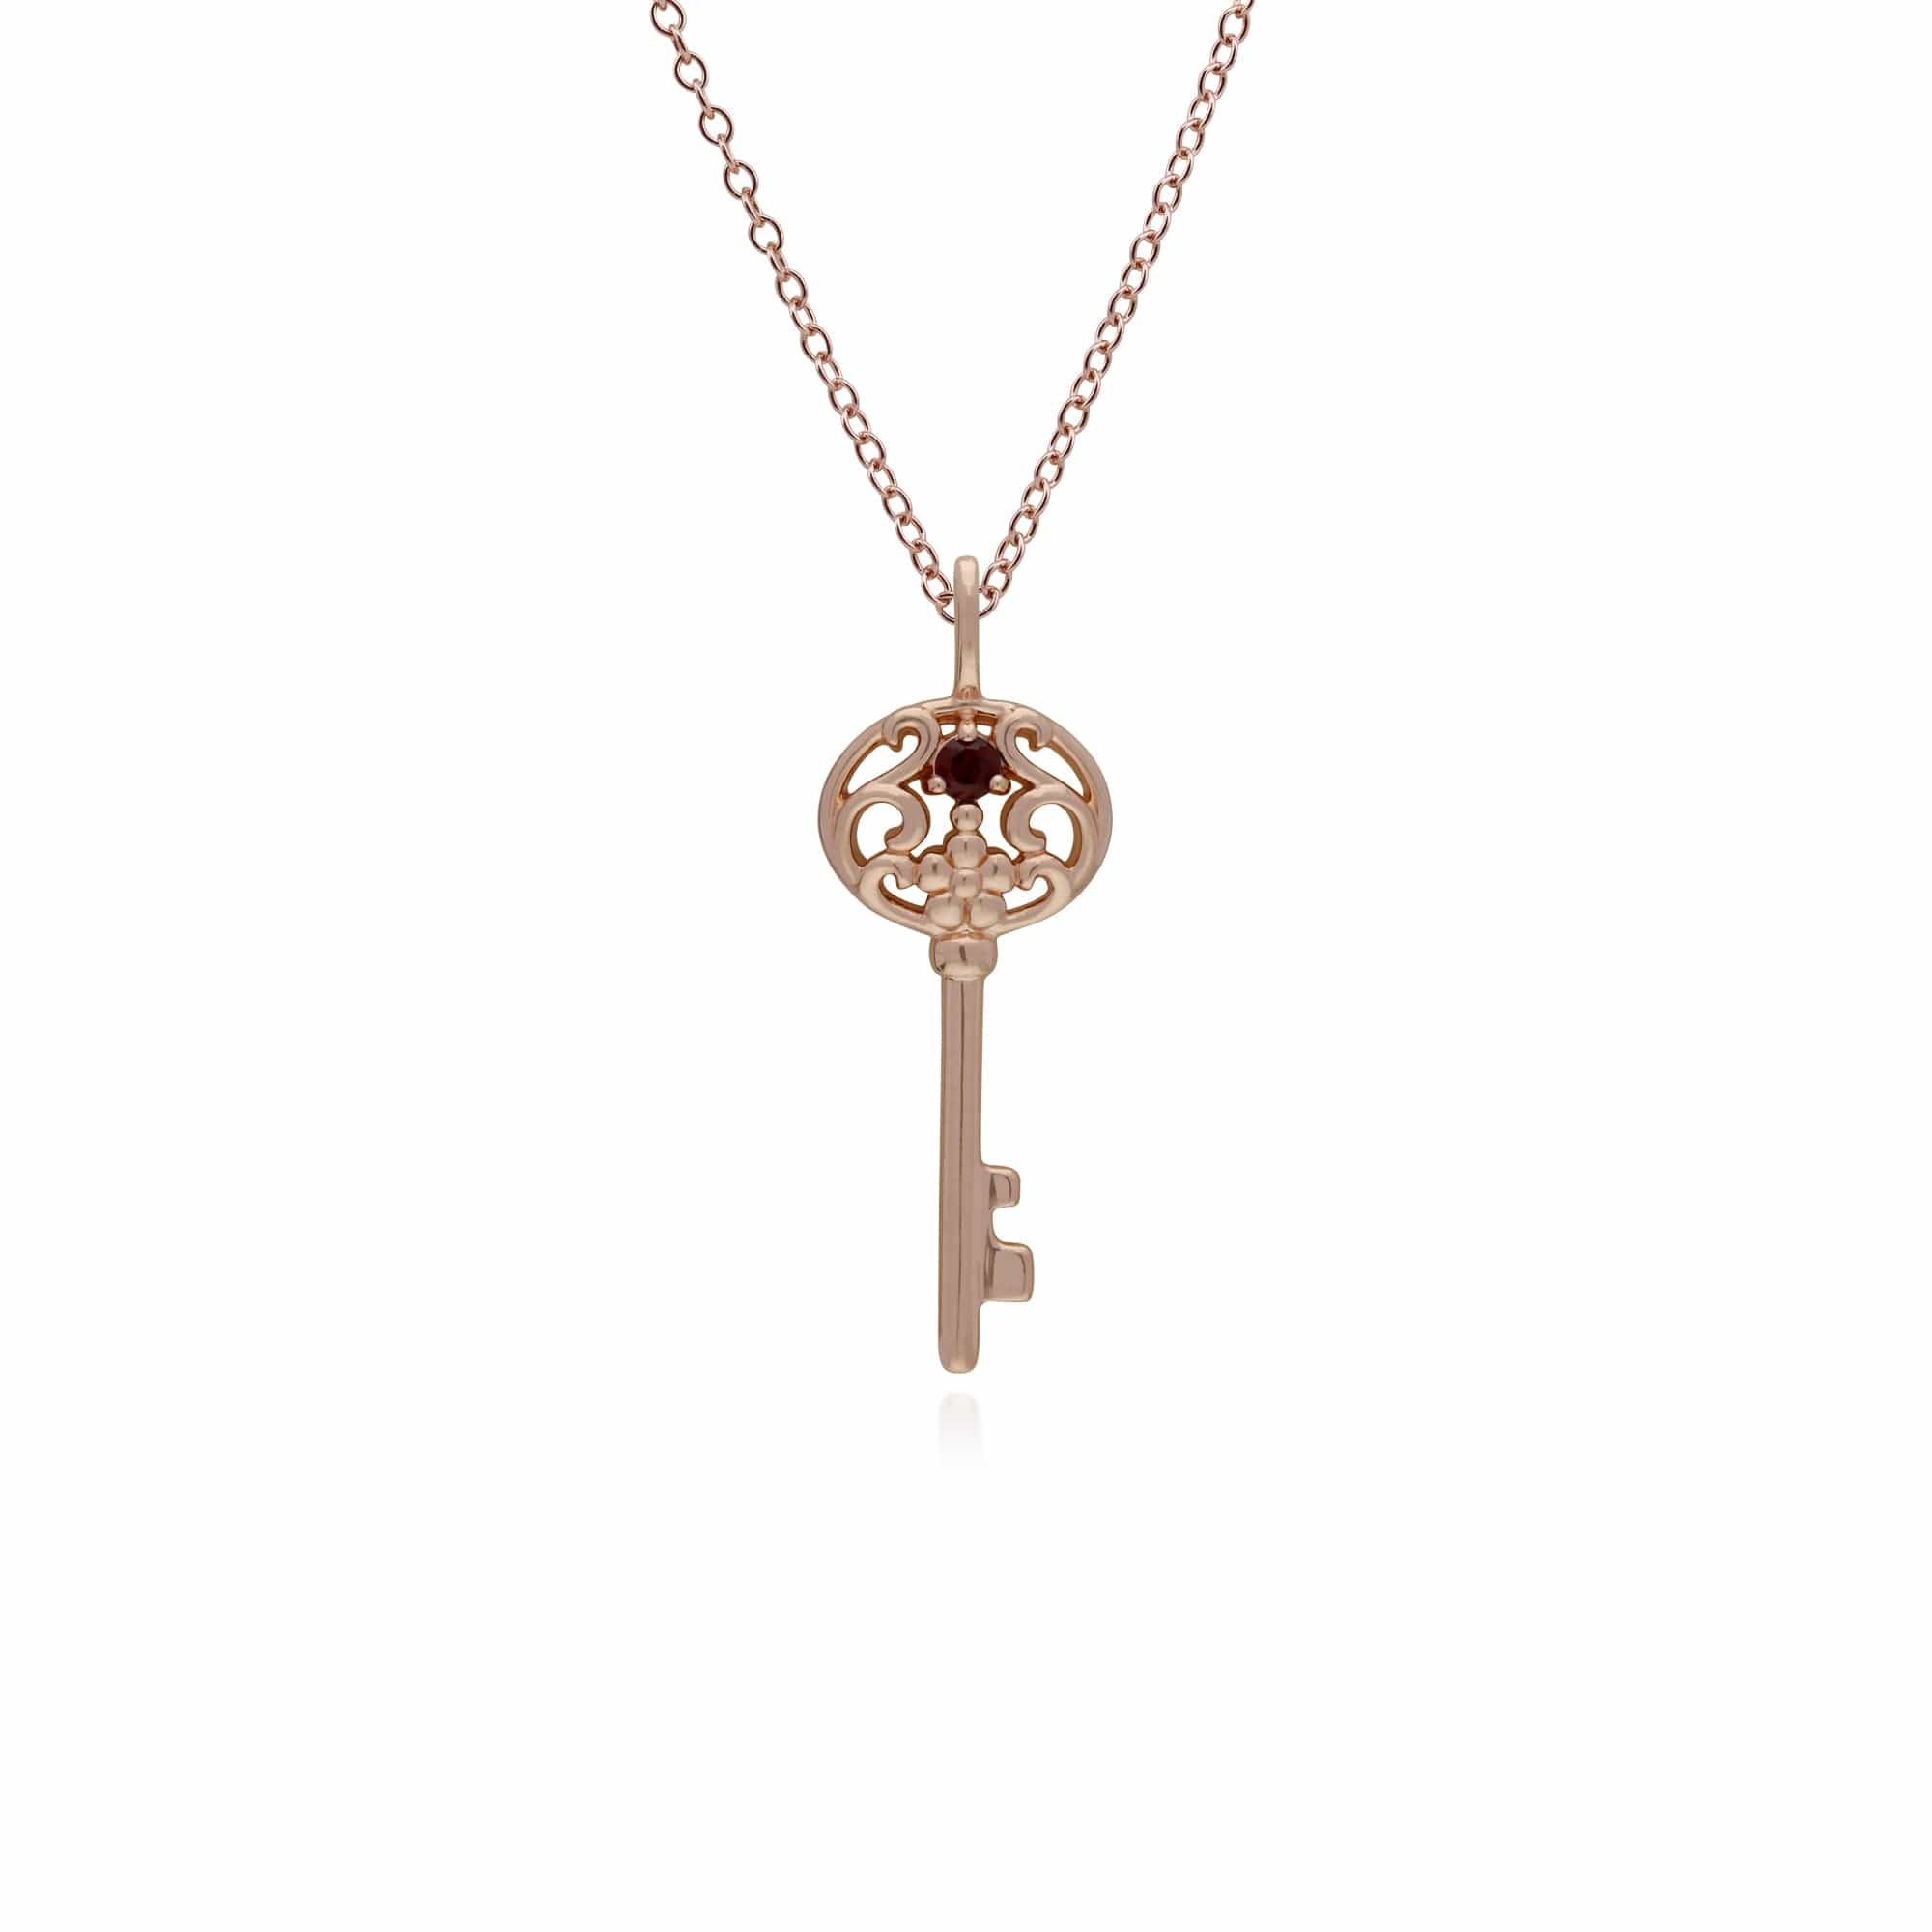 270P026707925-270P026901925 Classic Heart Lock Pendant & Garnet Big Key Charm in Rose Gold Plated 925 Sterling Silver 2